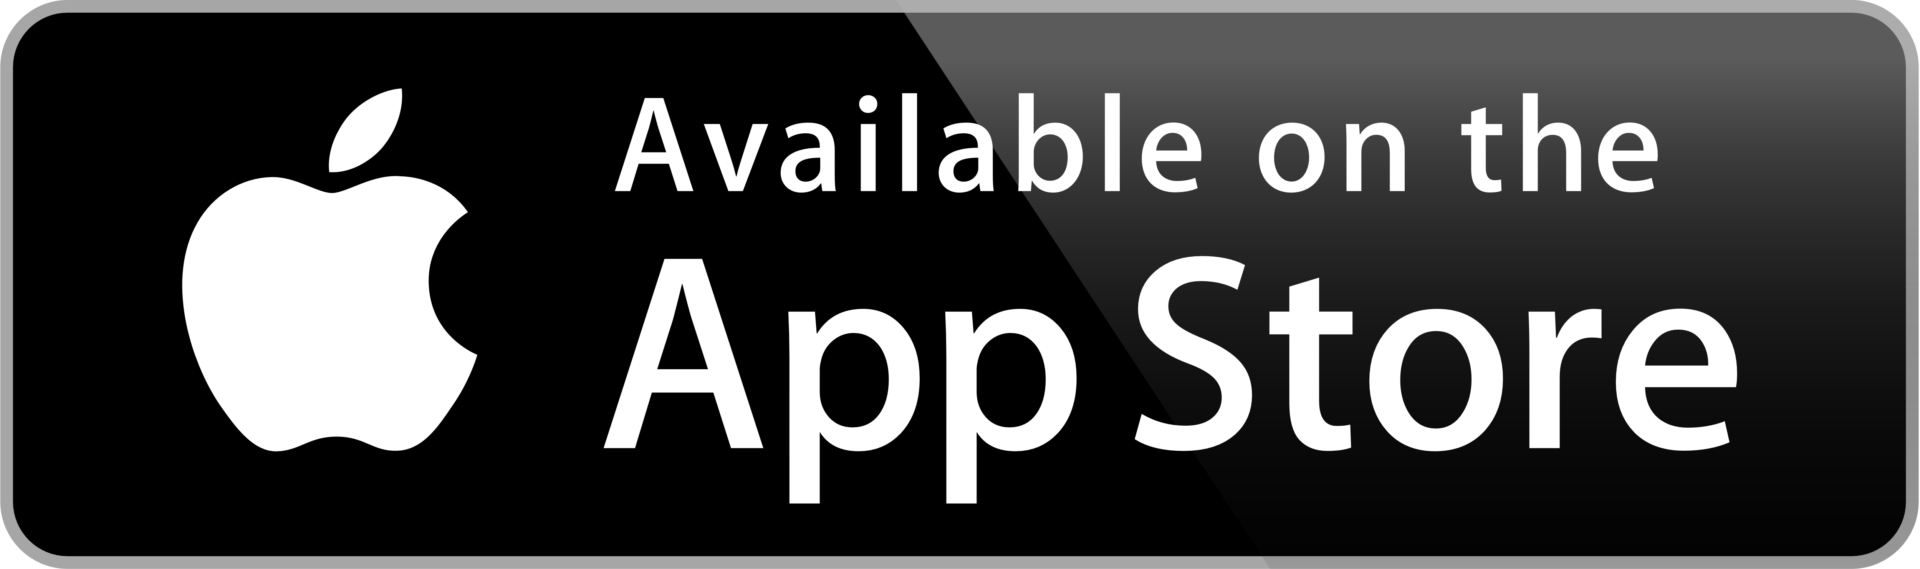 Available_on_the_App_Store_logo